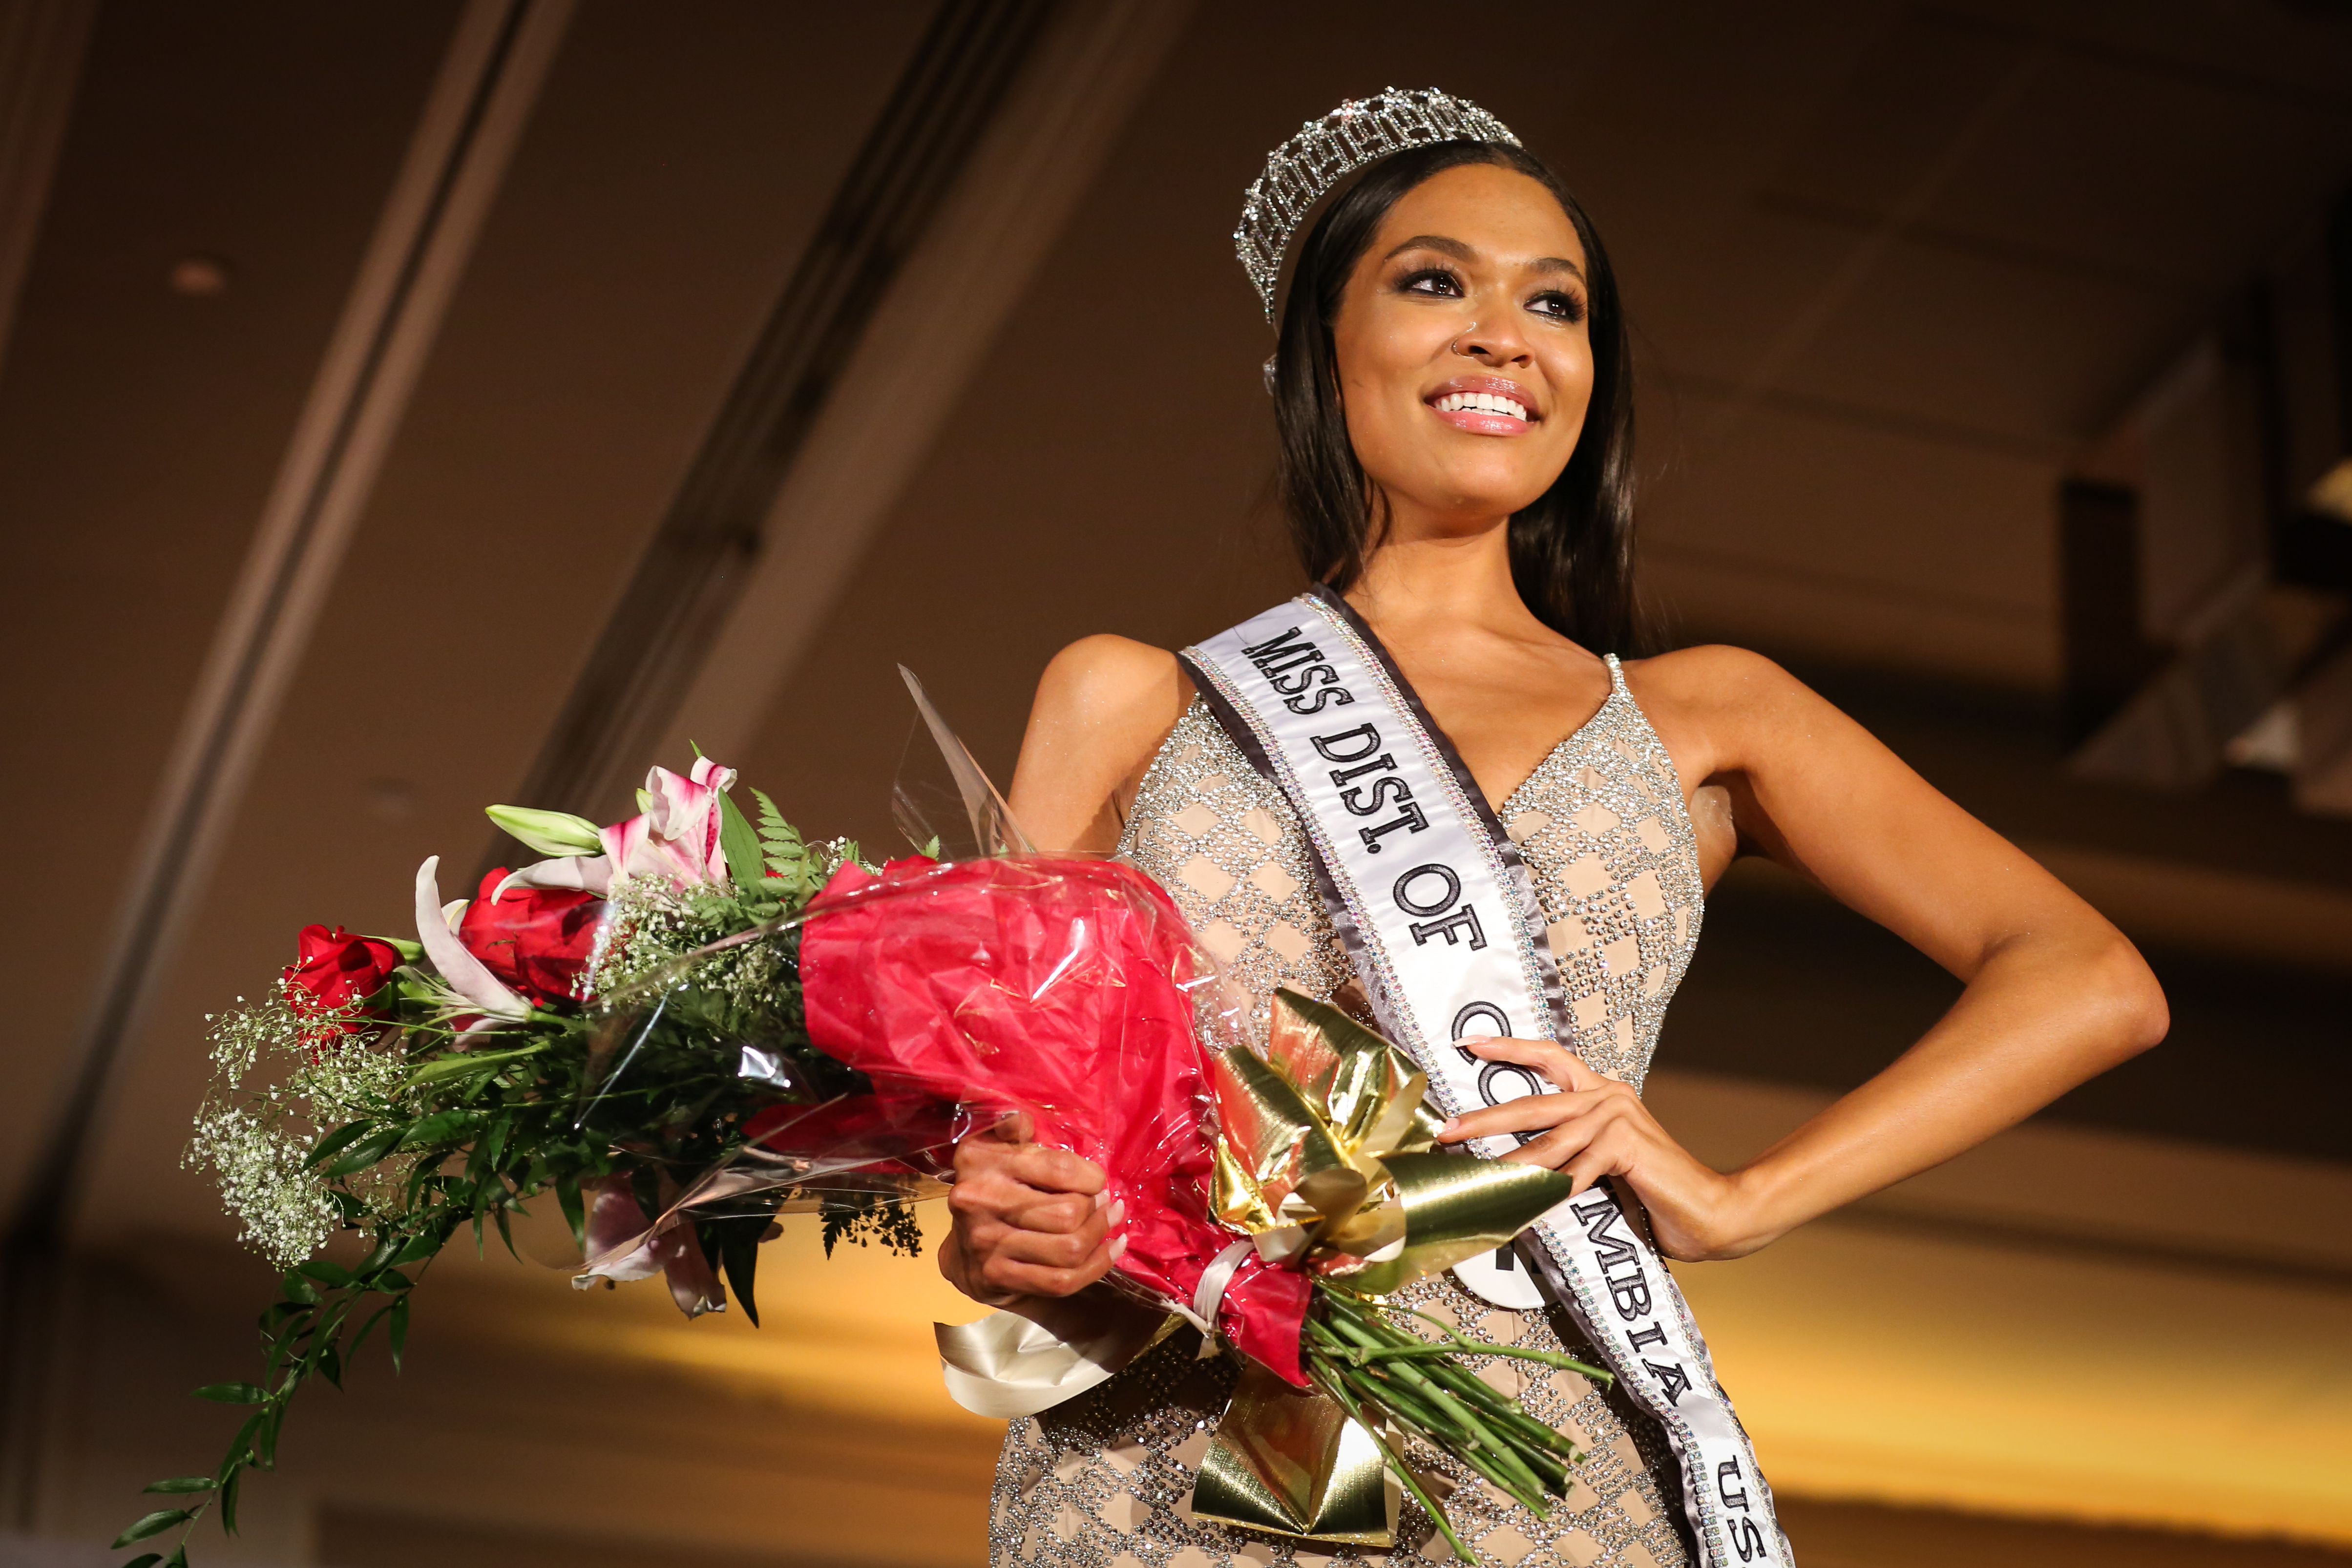 And the new Miss District of Columbia USA is.... DC Refined